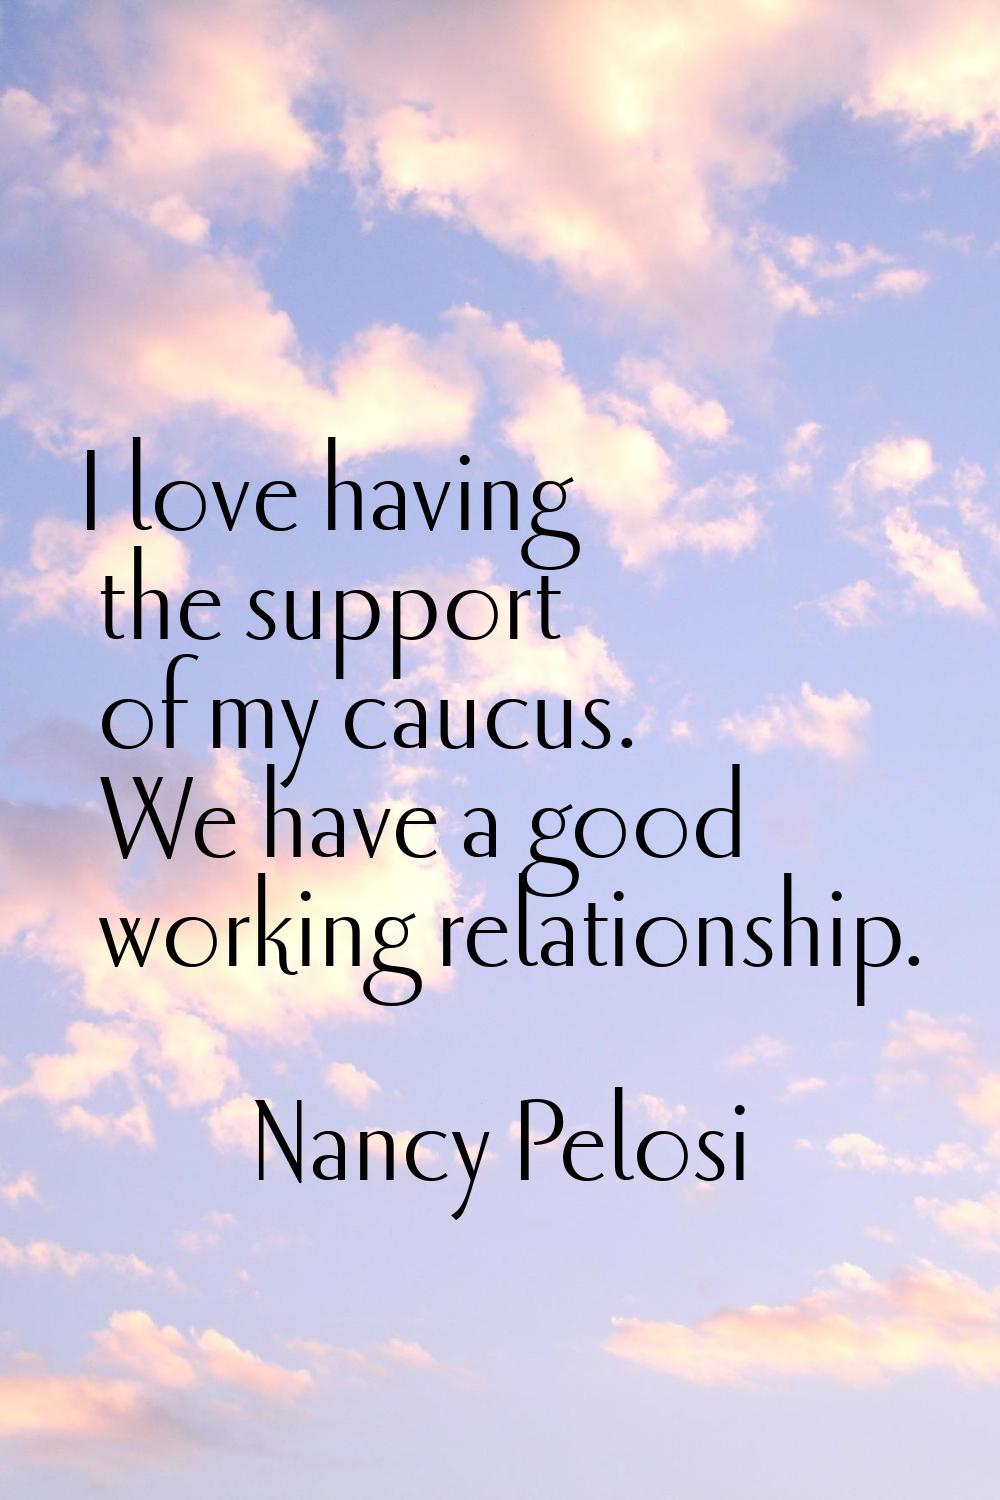 I love having the support of my caucus. We have a good working relationship.